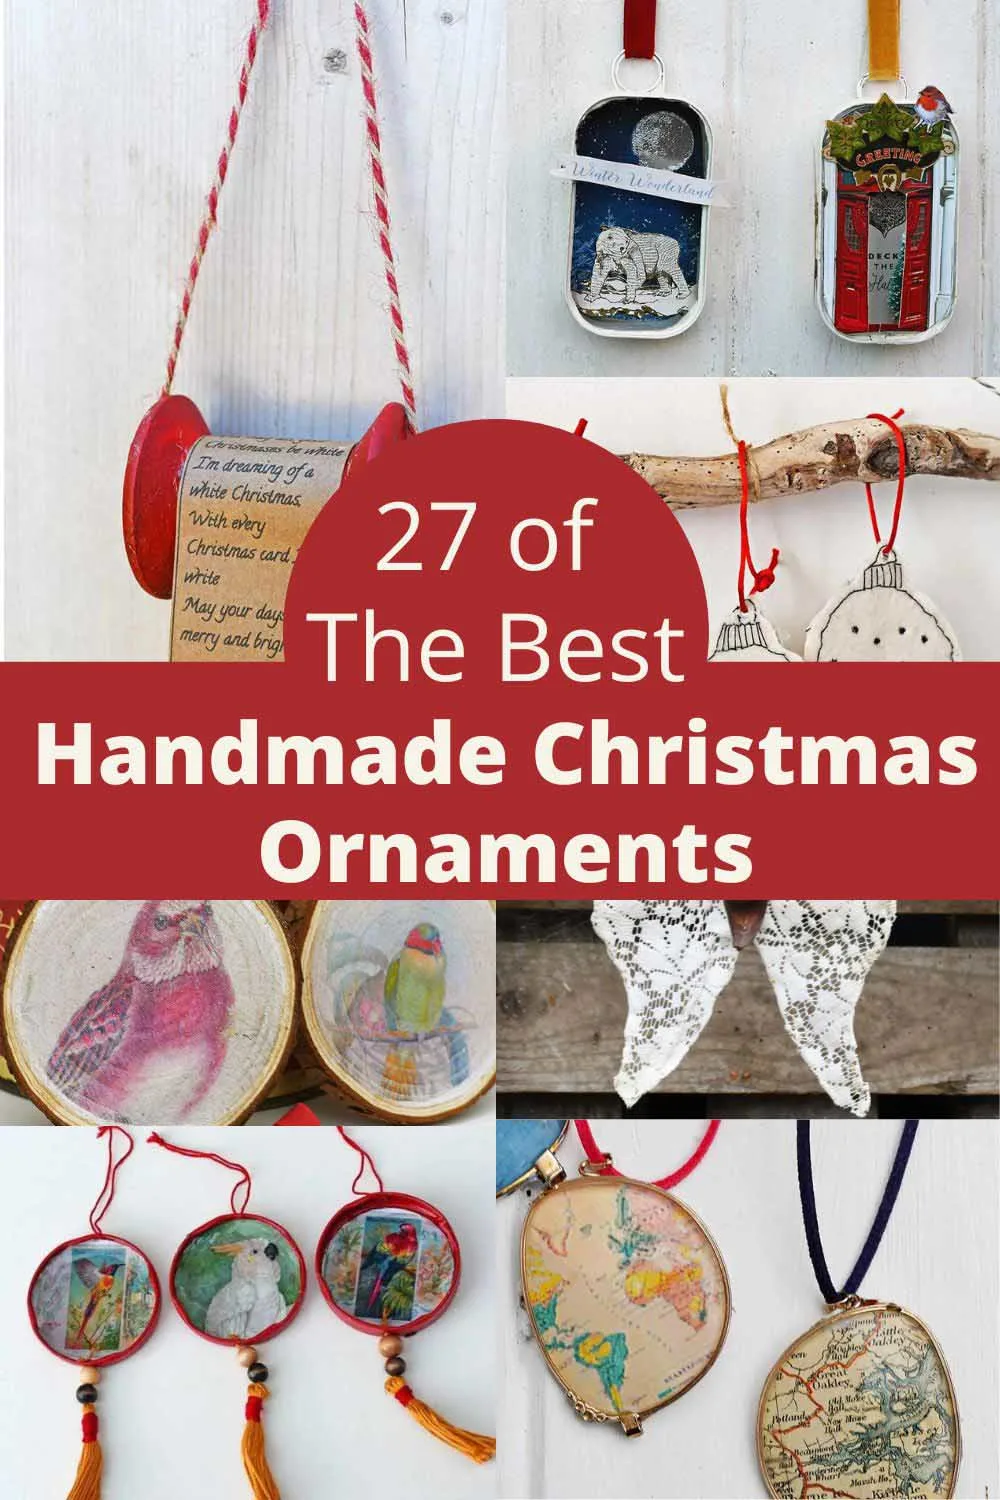 13 DIY Snowflake Ornament Crafts To Decorate Your Home With This Winter -  Rustic Crafts & DIY